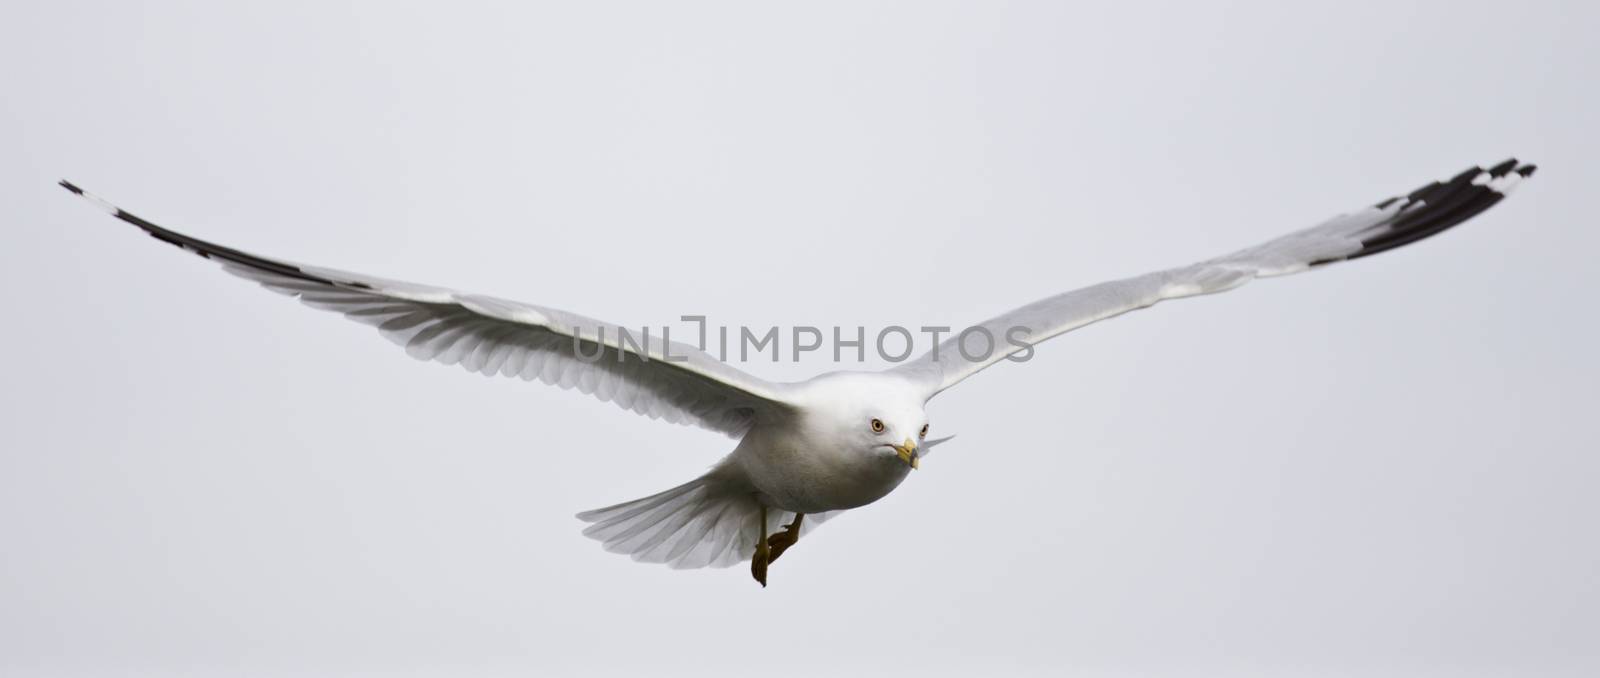 Beautiful isolated photo of a calm flight of a gull